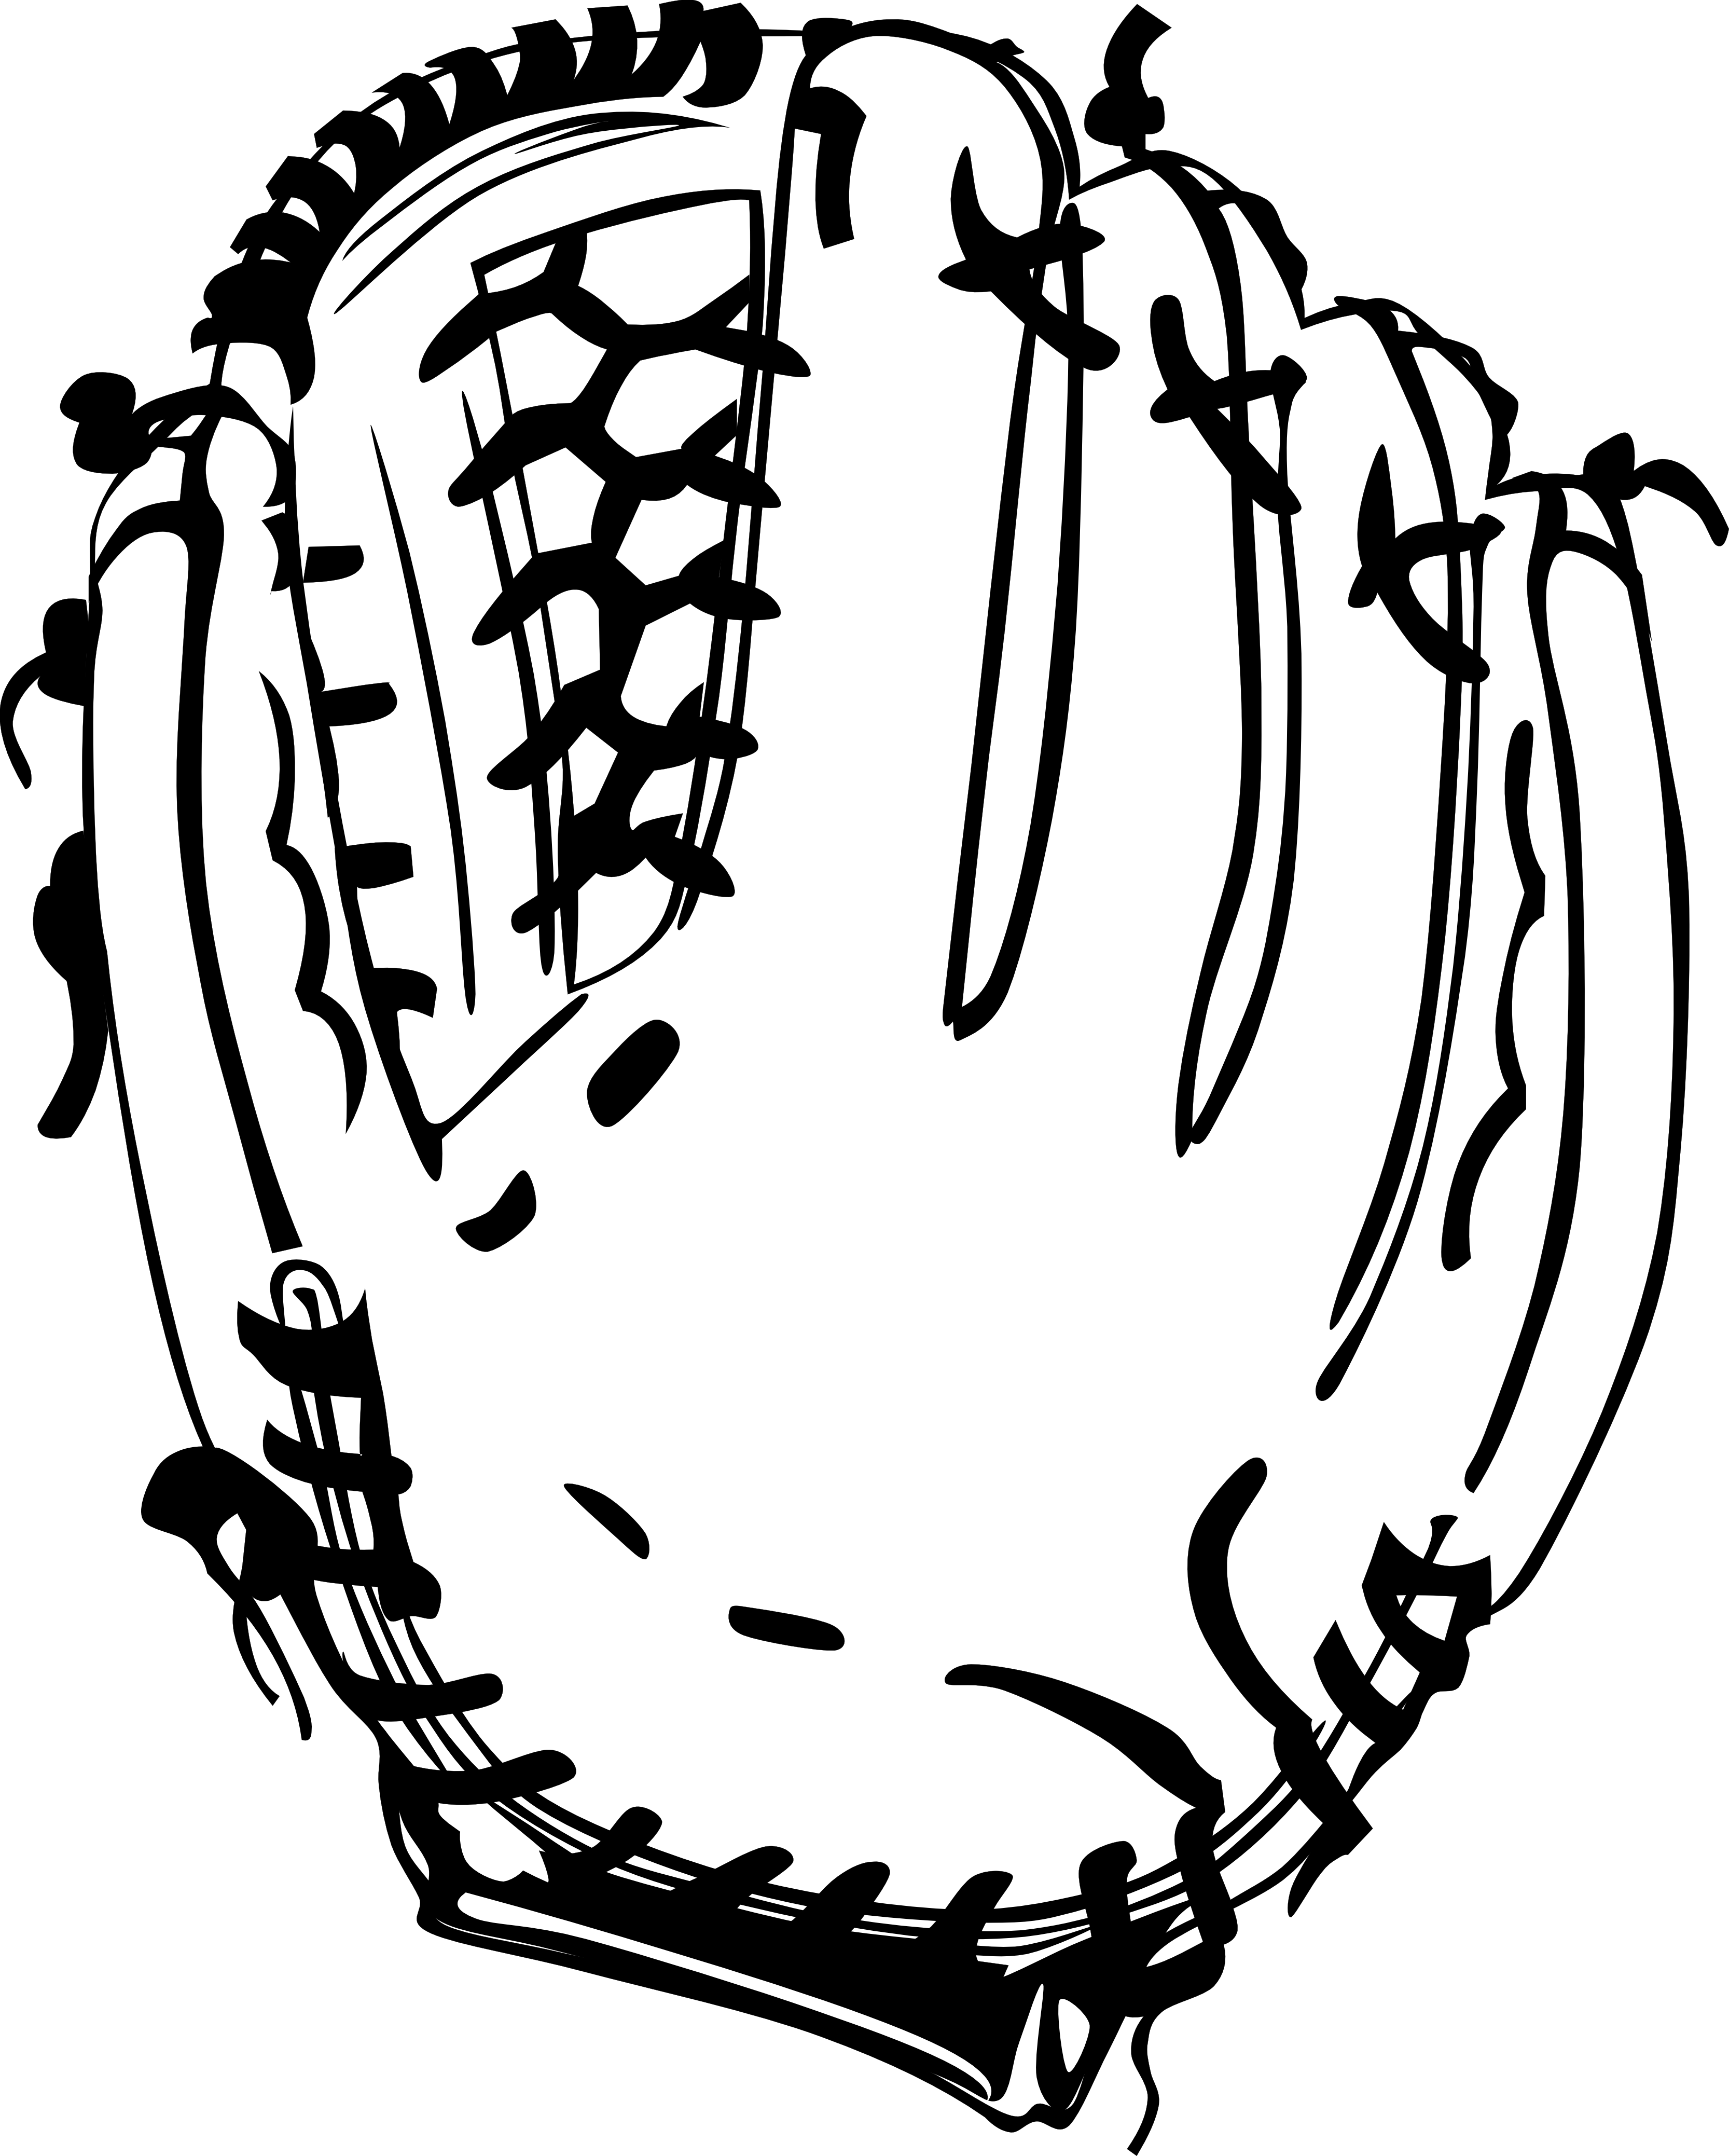 Baseball Clipart Black And White Hd Images 3 HD Wallpapers | amagico.